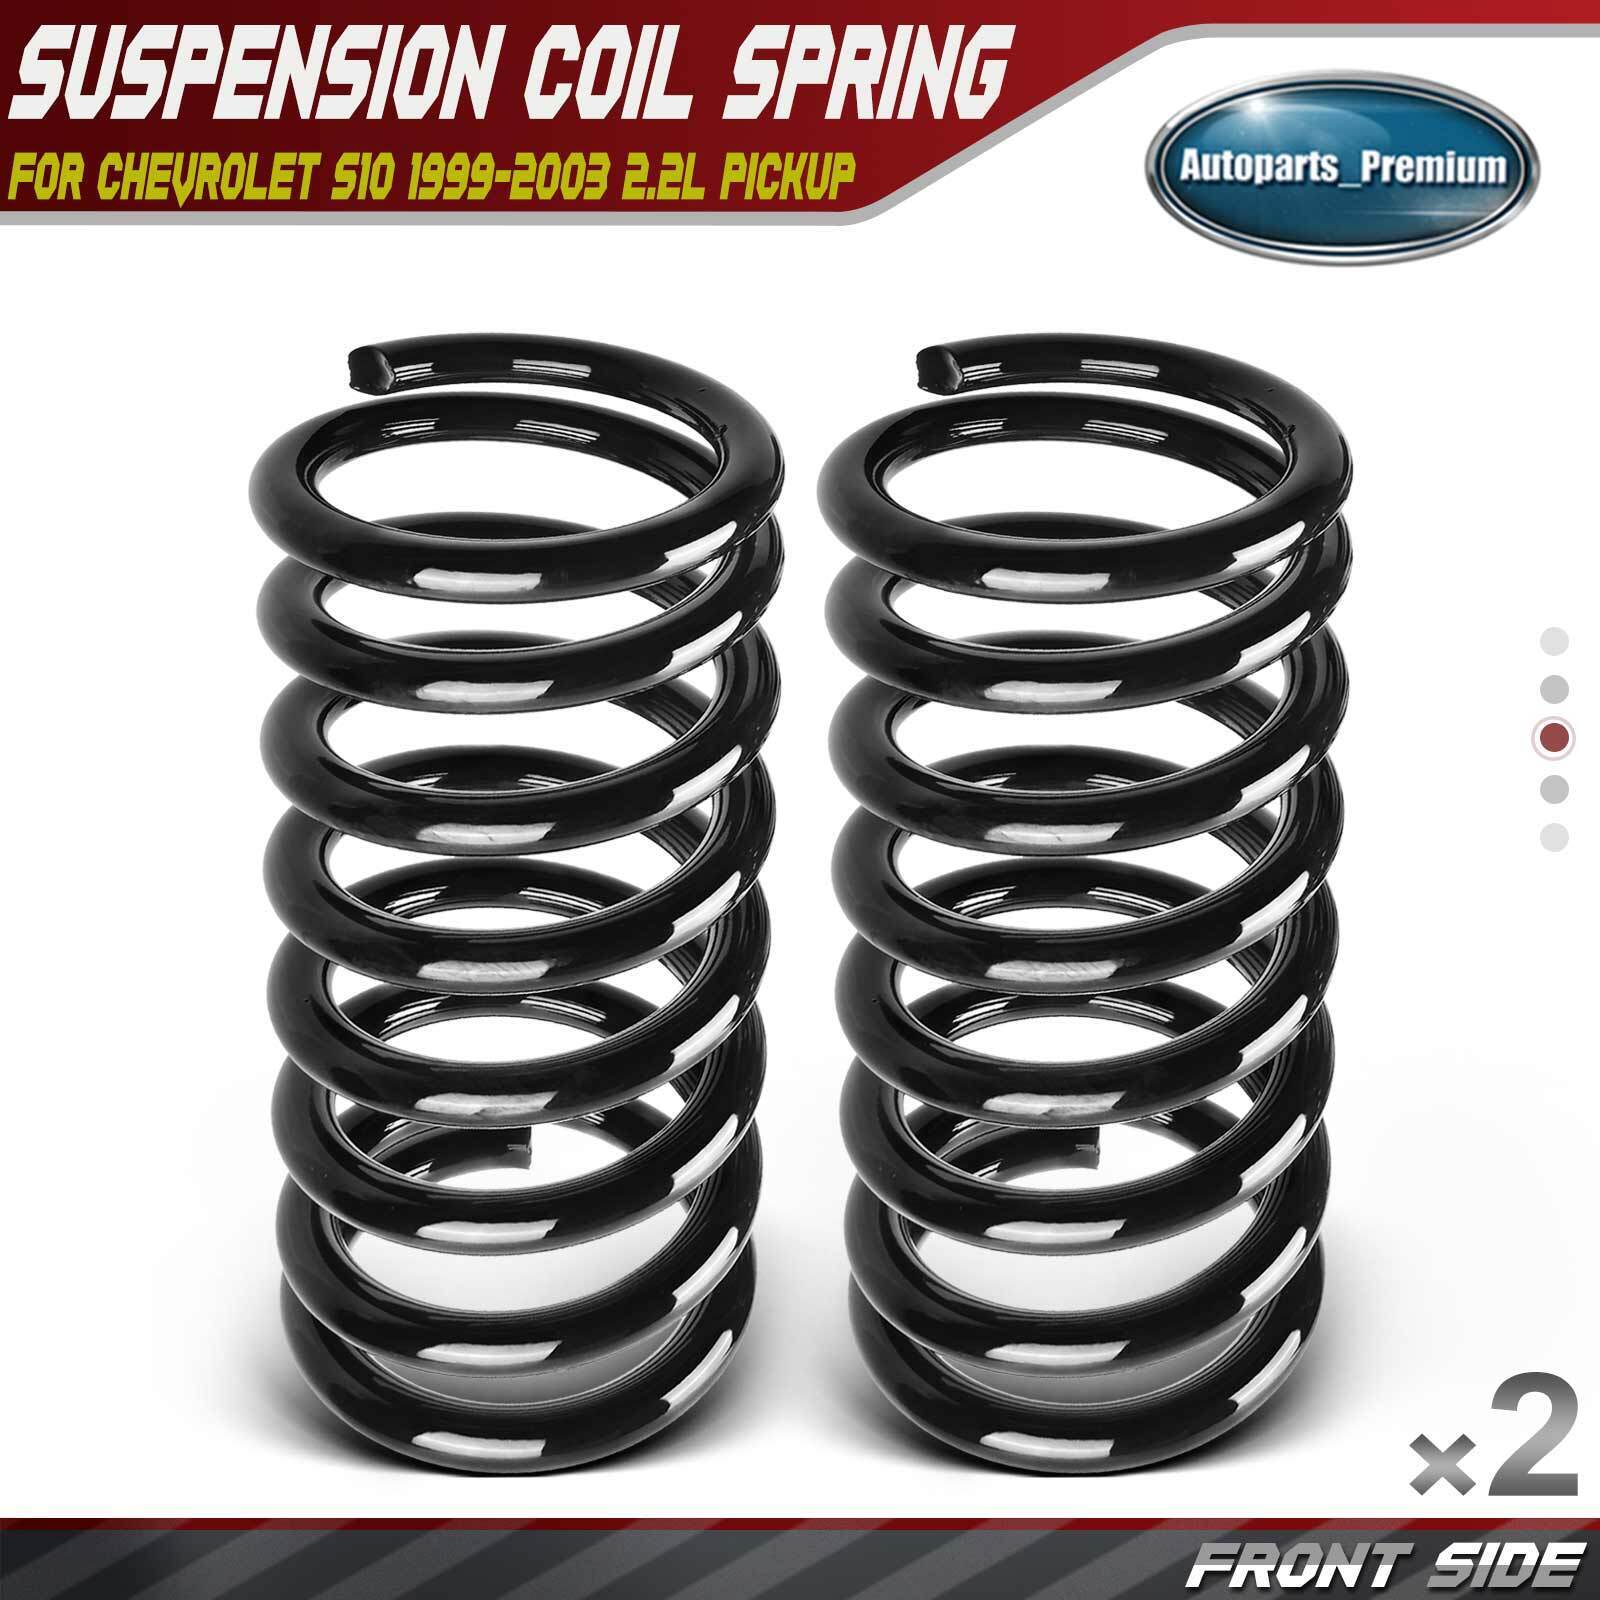 2x Front Left & Right Coil Springs for Chevrolet S10 1999-2003 L4 2.2L Pickup